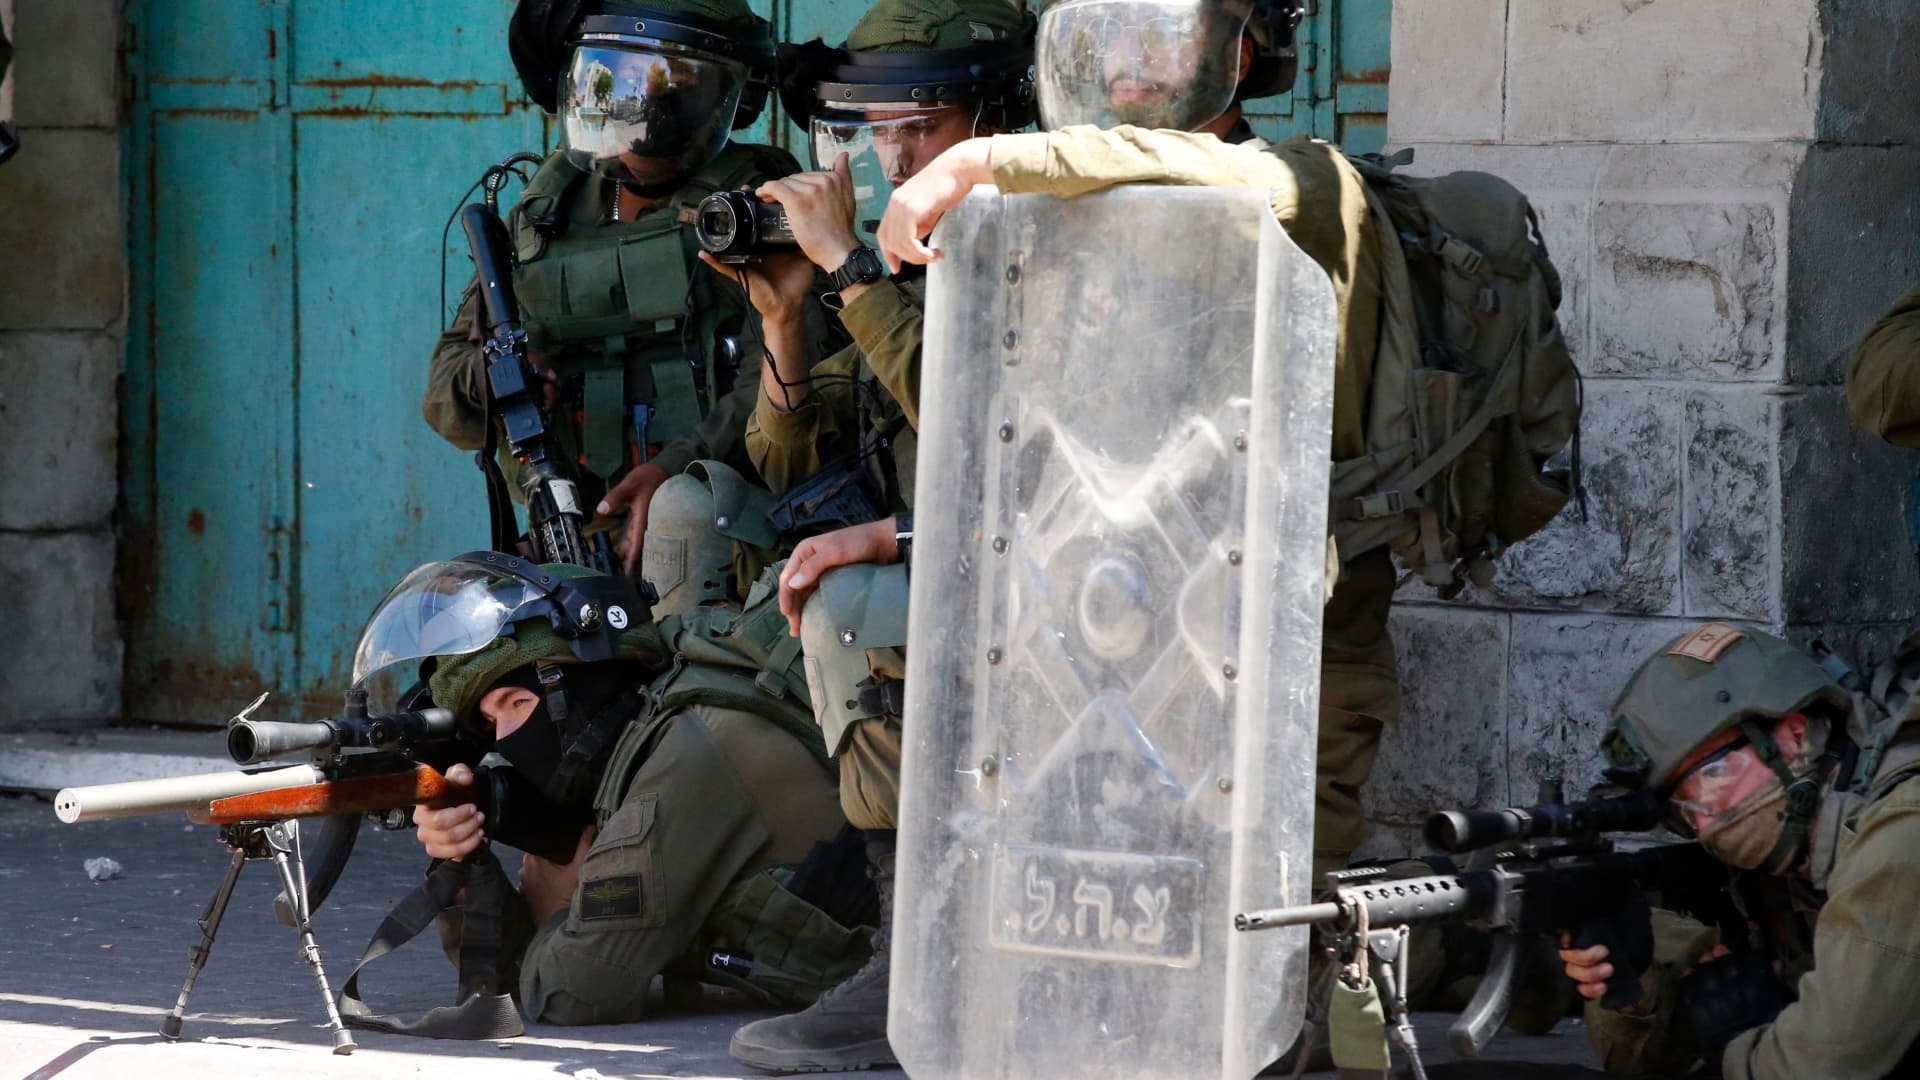 Israeli security forces take aim at Palestinian demonstrators during protests against Israel's occupation and its air campaign on the Gaza strip, in the occupied West Bank town of Hebron May 18, 2021.